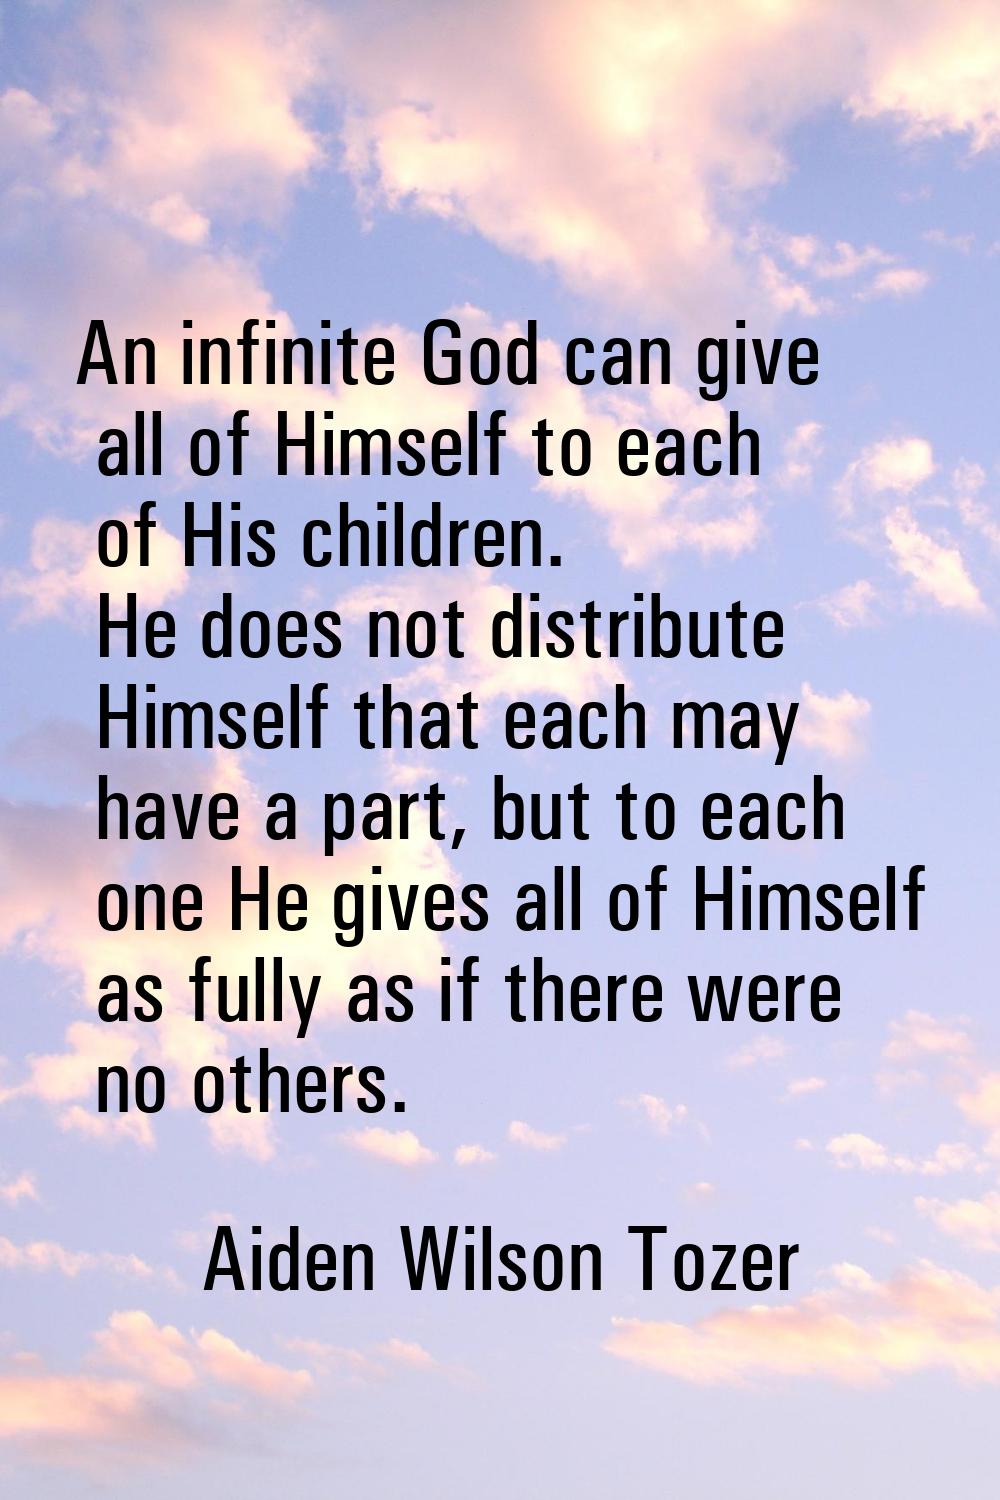 An infinite God can give all of Himself to each of His children. He does not distribute Himself tha